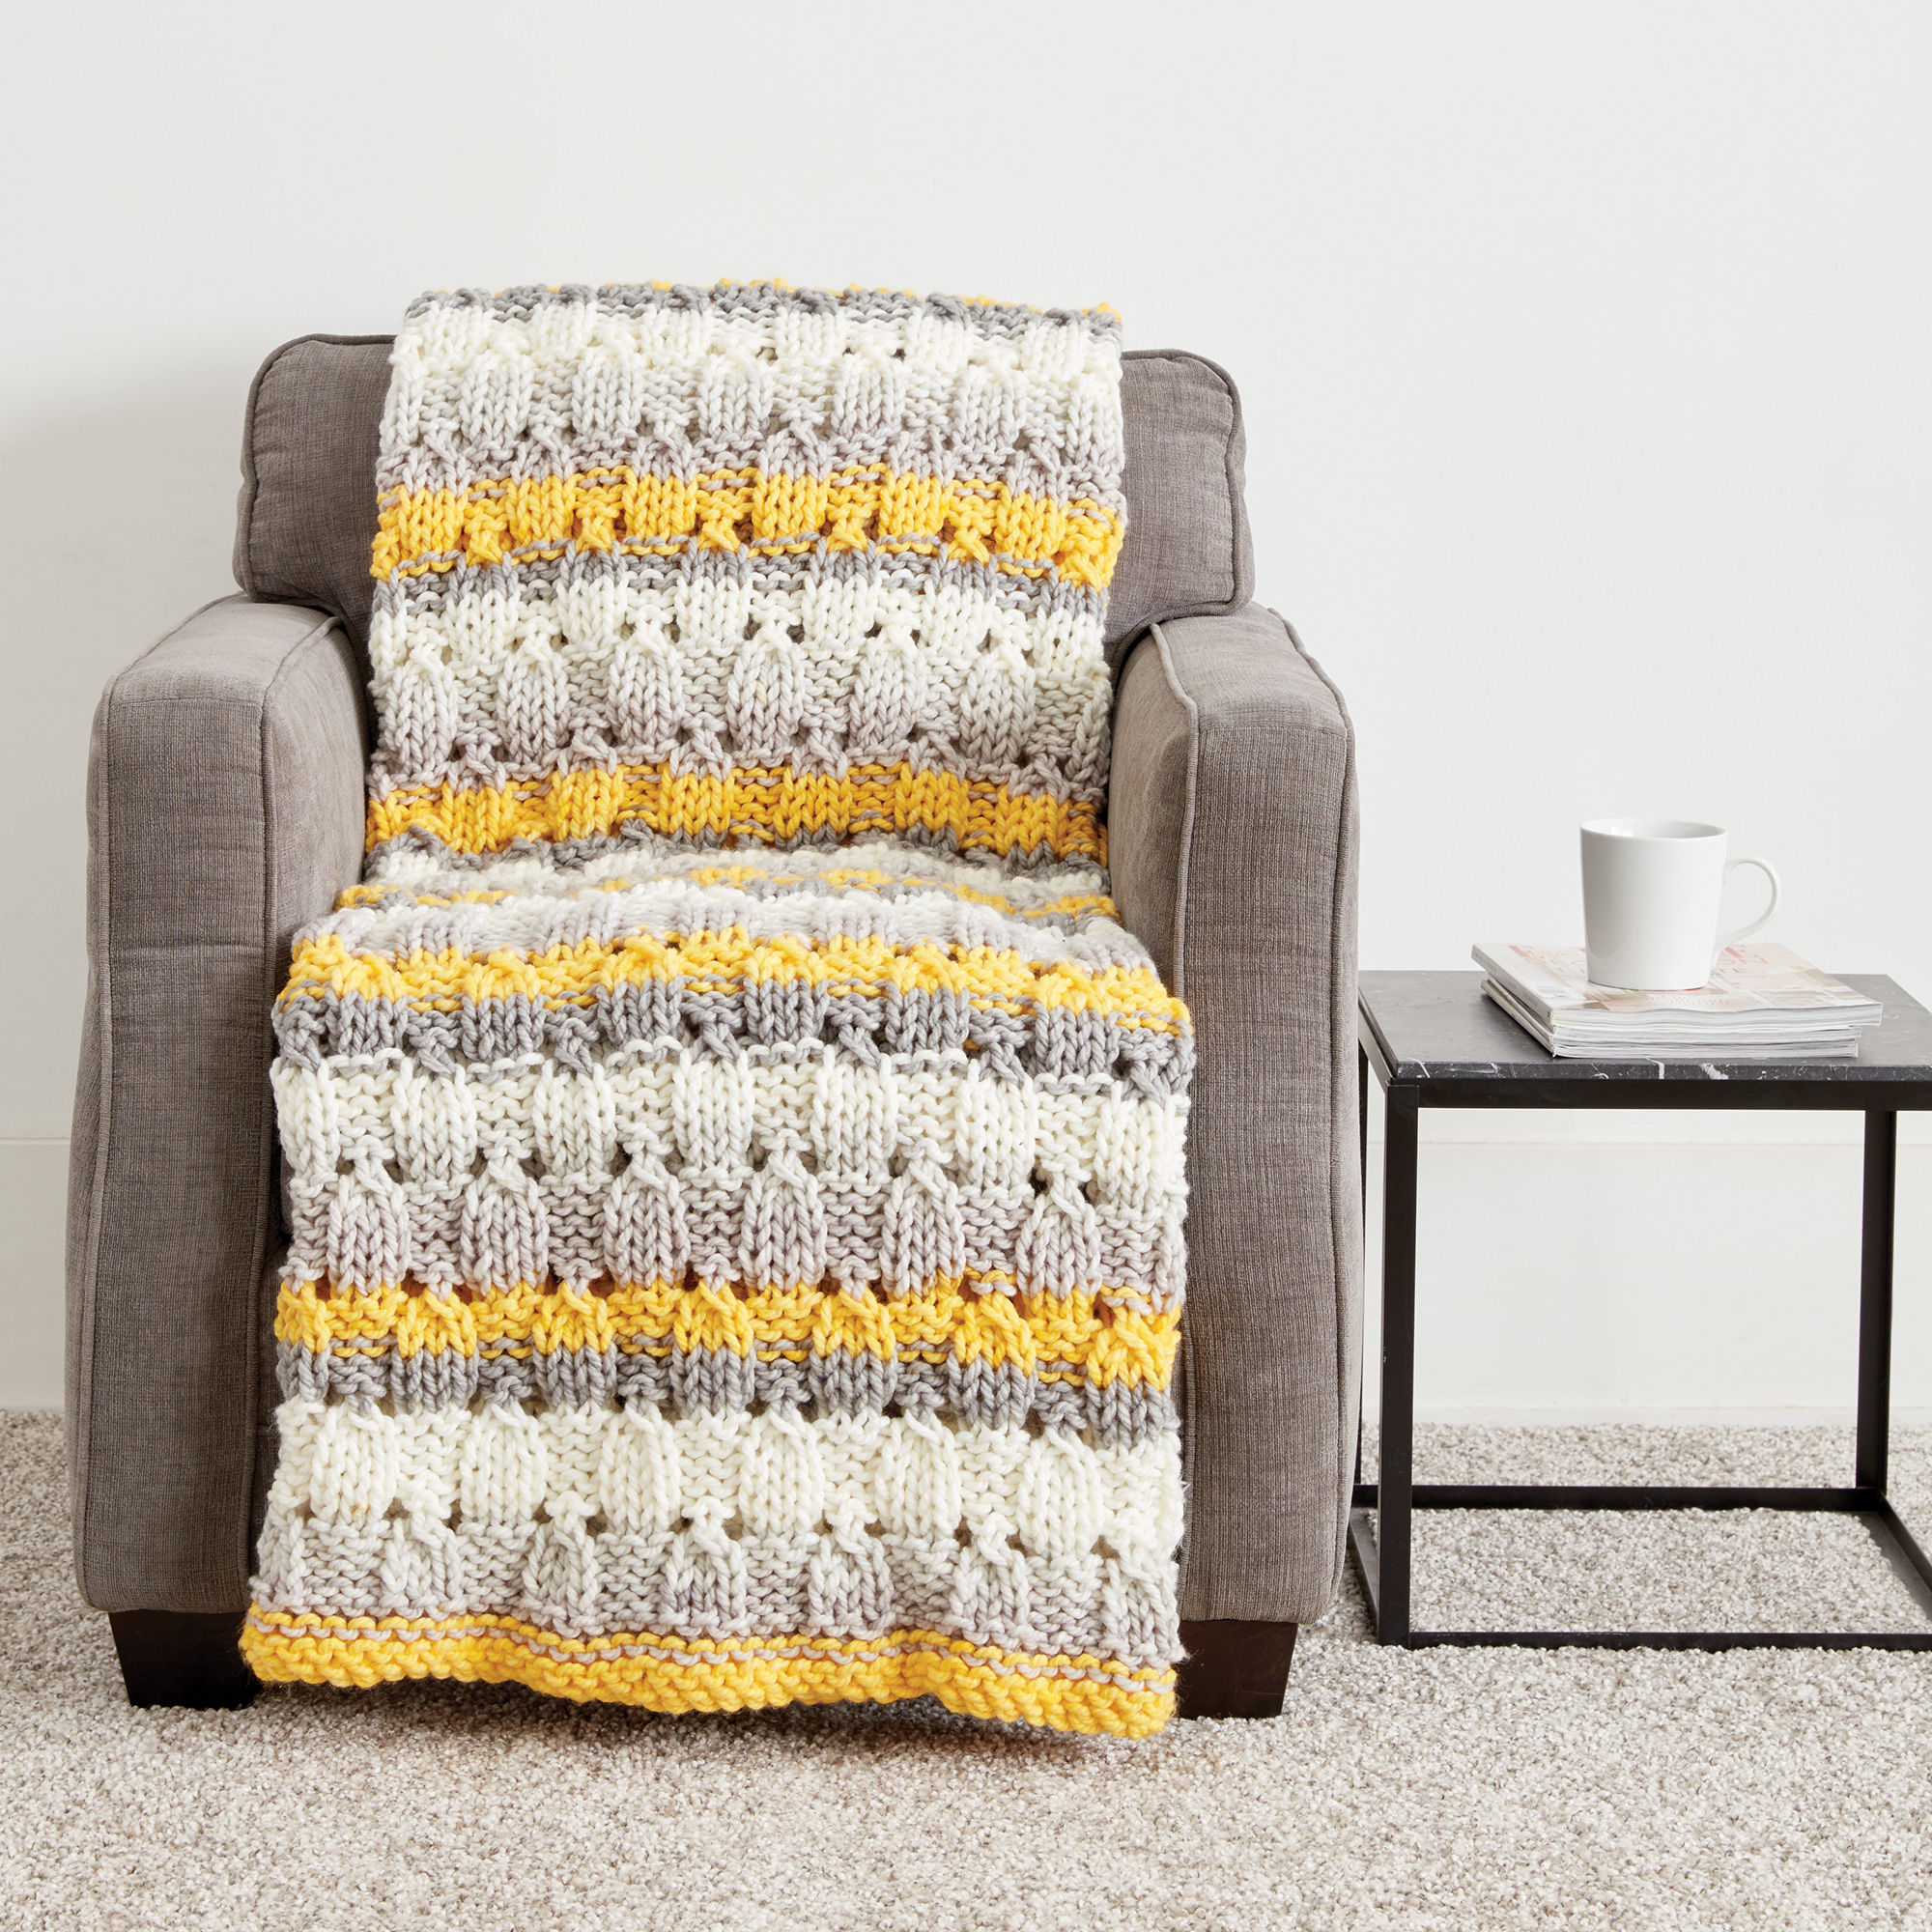 Free Knitting Pattern For A Patchwork Blanket